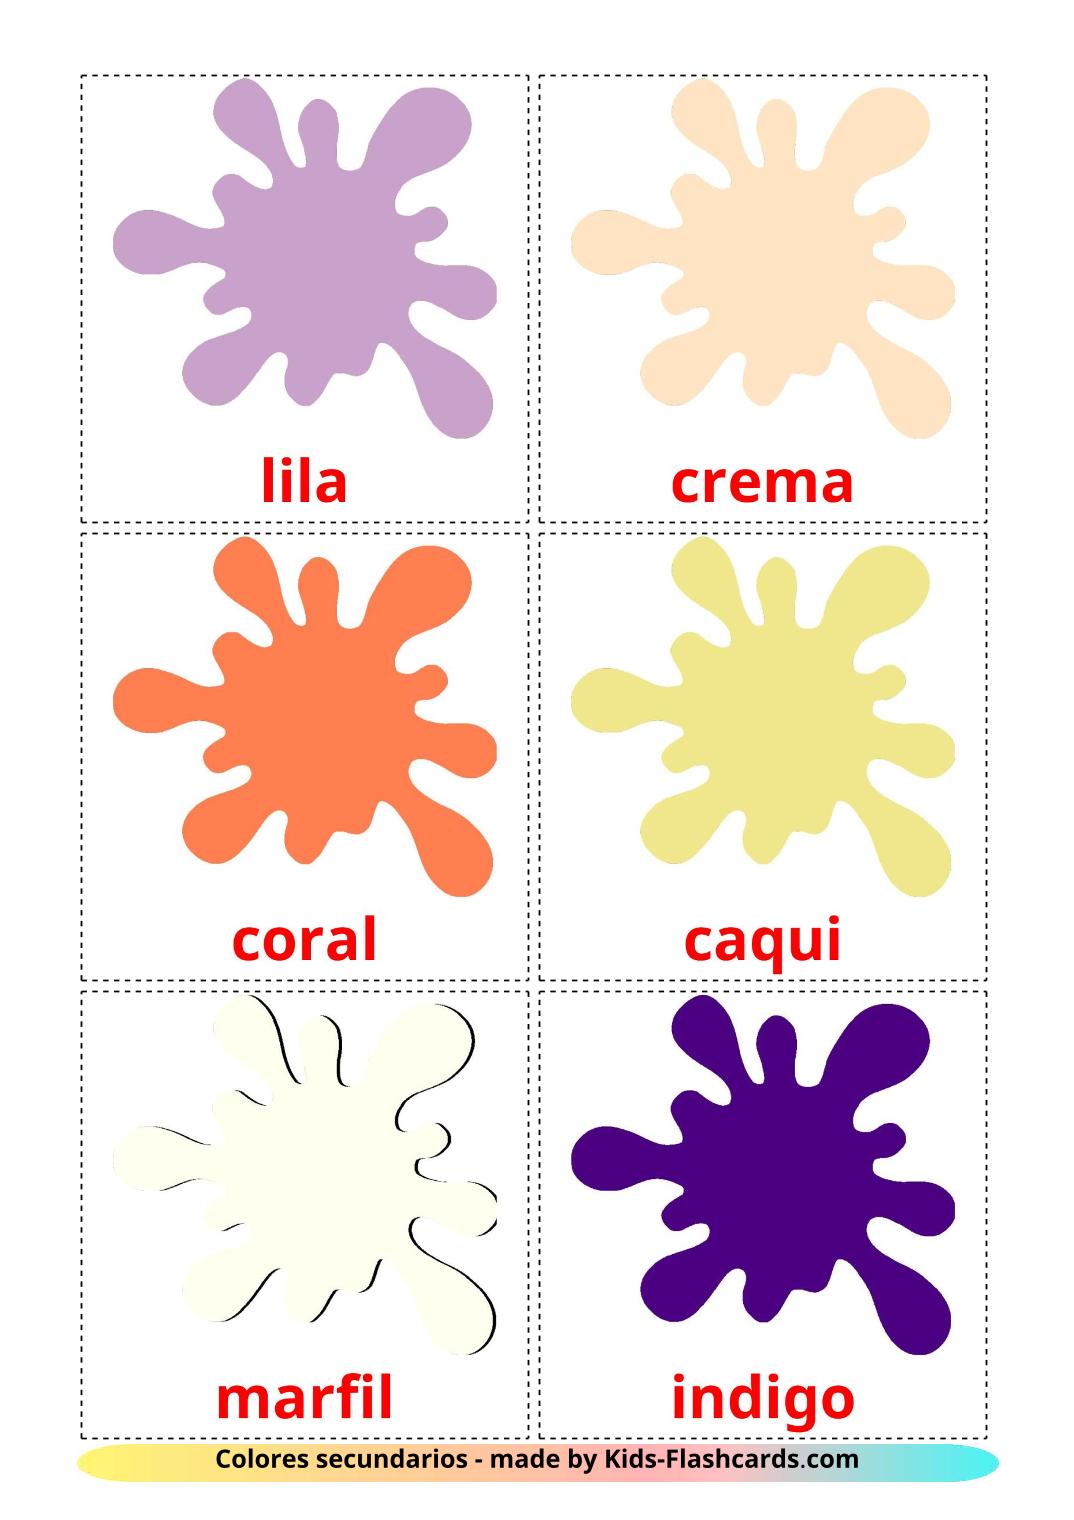 Secondary colors - 20 Free Printable spanish Flashcards 